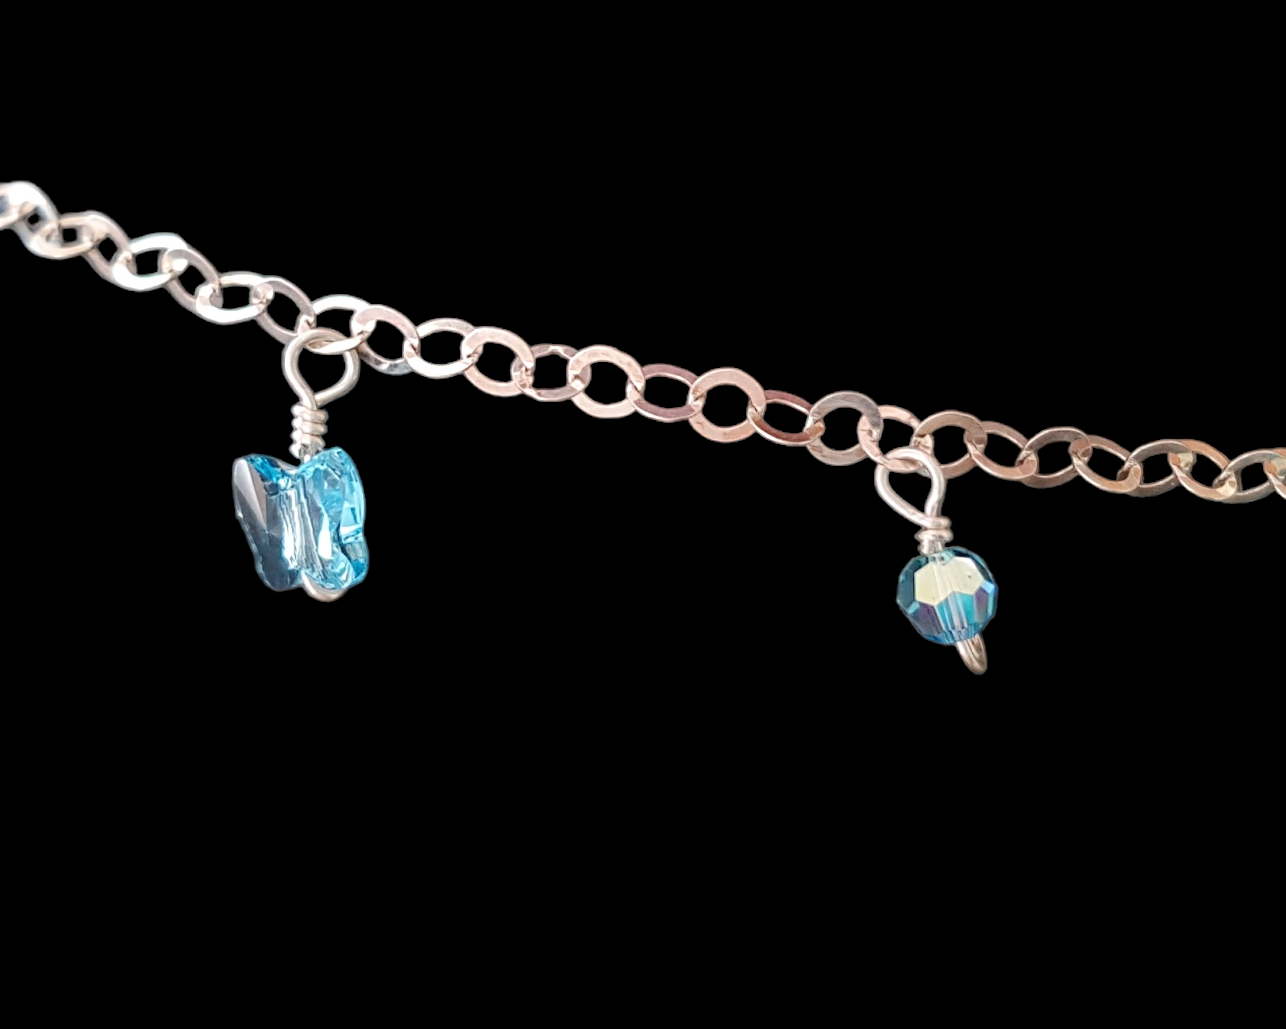 Blue Crystal Butterfly Anklet-Ankle Bracelet with little Crystal Butterflies and beads dangling on  Sterling Silver Chain.